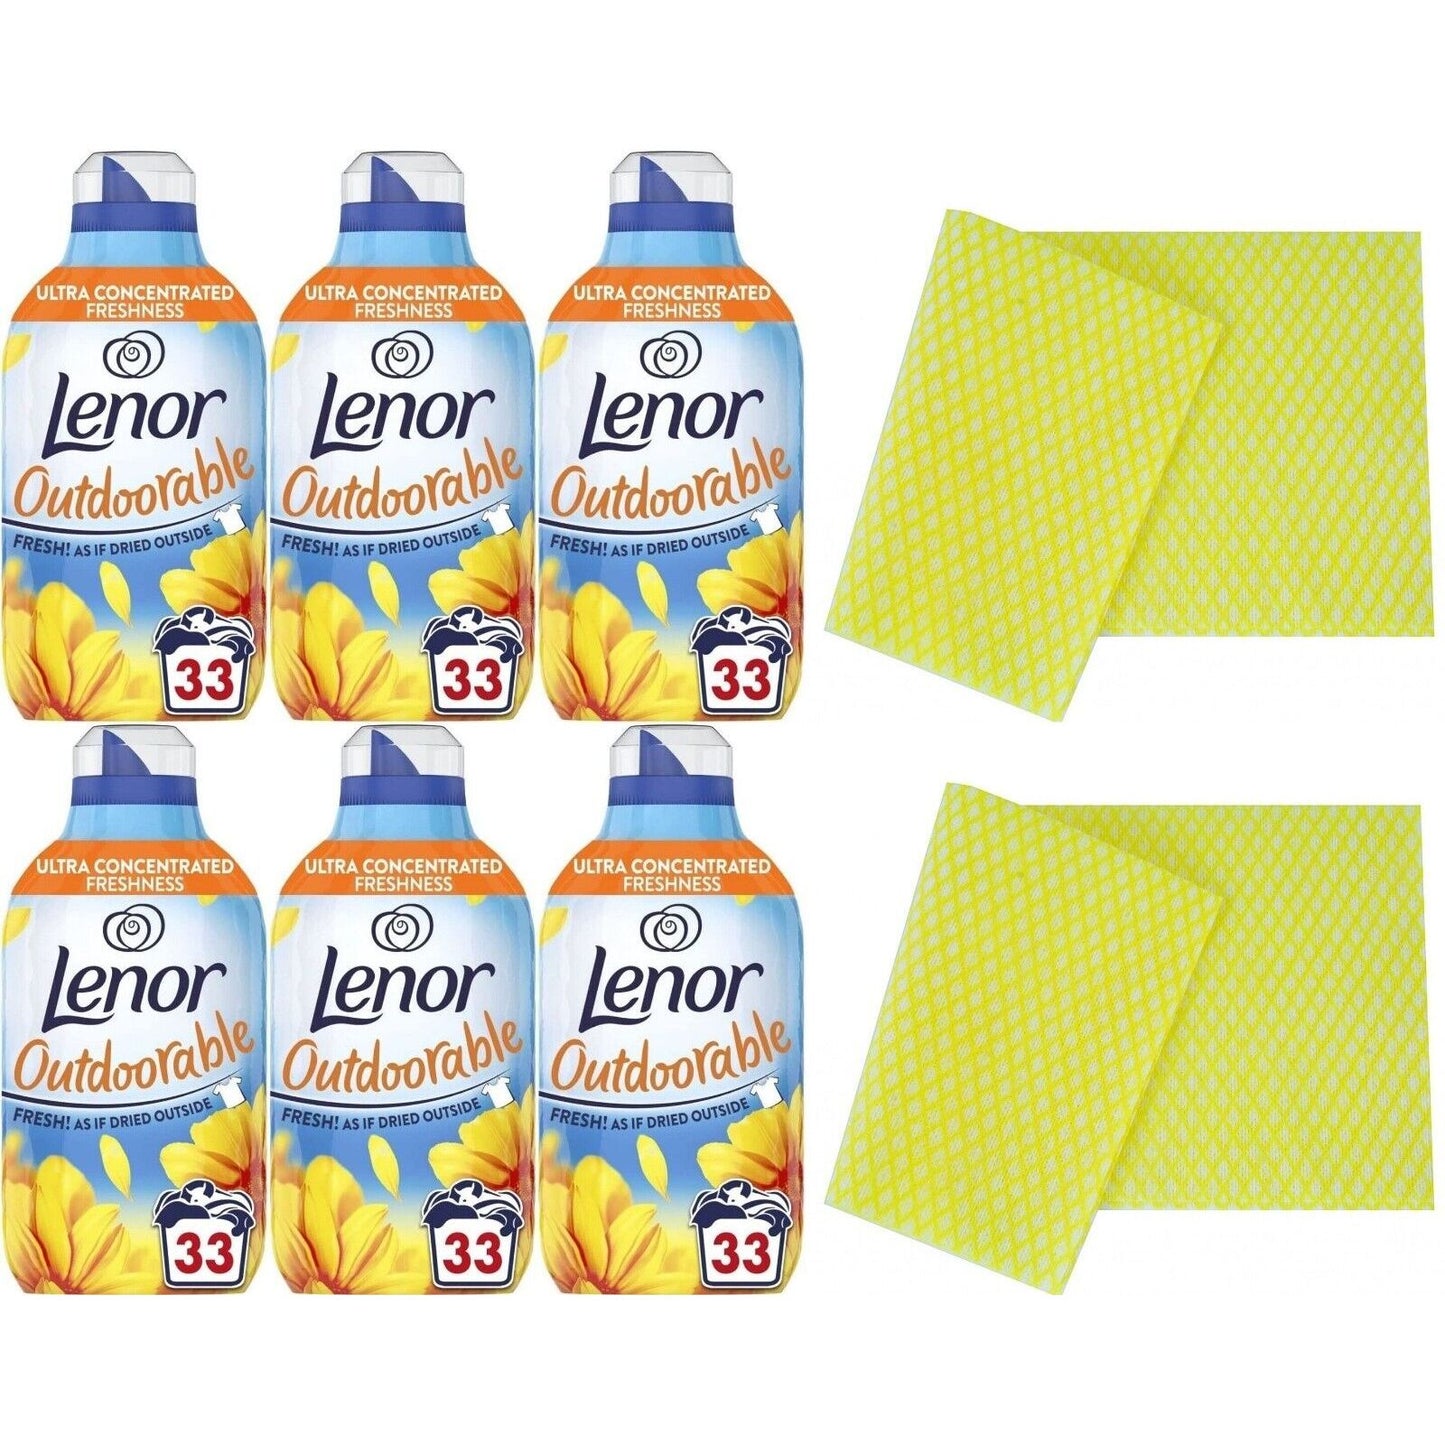 6 x Lenor Outdoorable Conditioner,33W,462ml.-Summer Breeze+Cleaning cloth